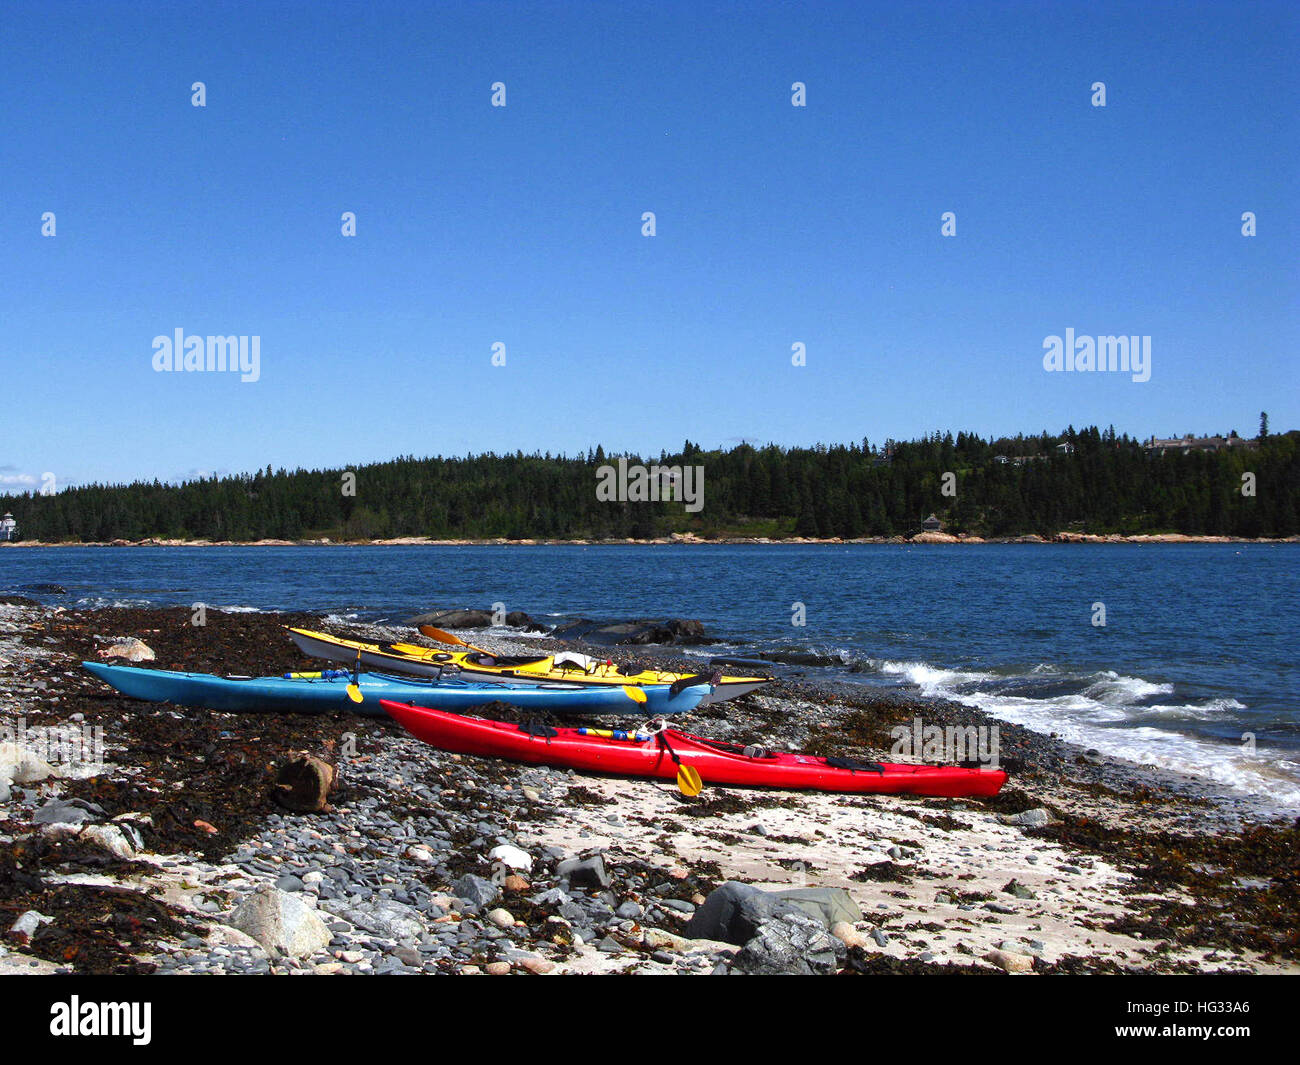 Acadia National Park, Schoodic Peninsula. Sea kayaks on a ledge in the middle of Frenchman's Bay, Winter Harbor, Maine Stock Photo